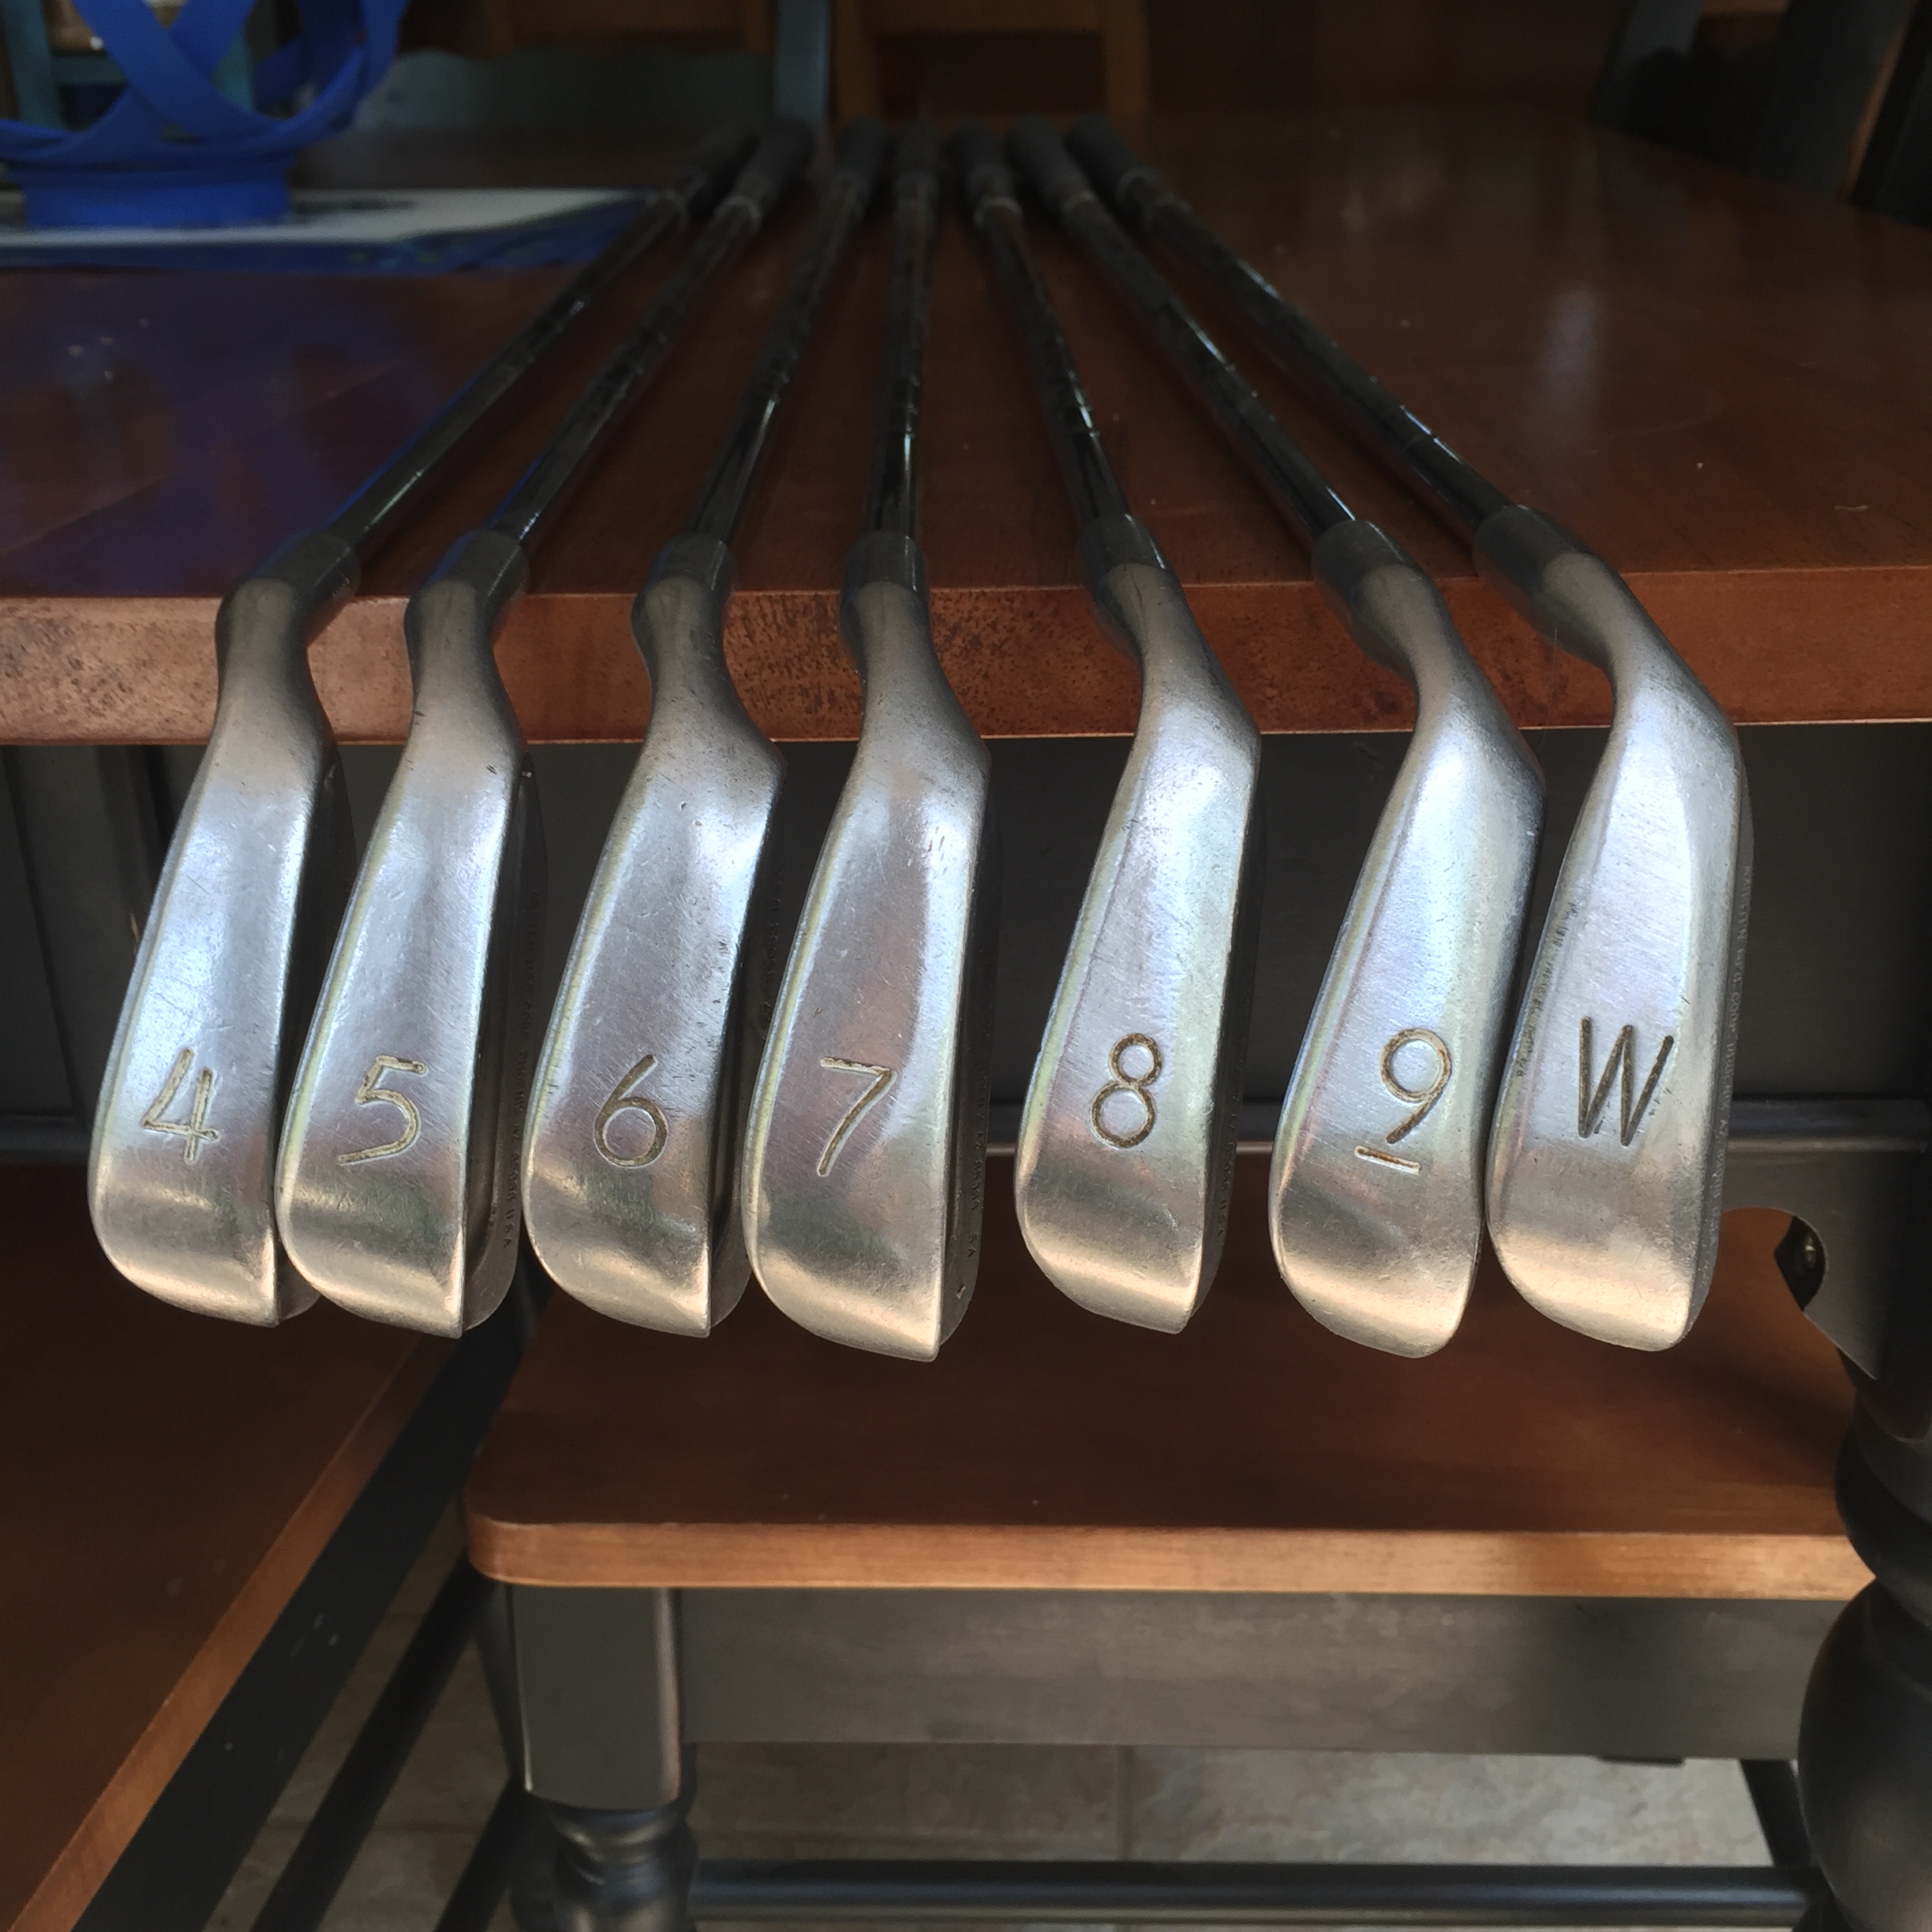 Golf Clubs - Ping